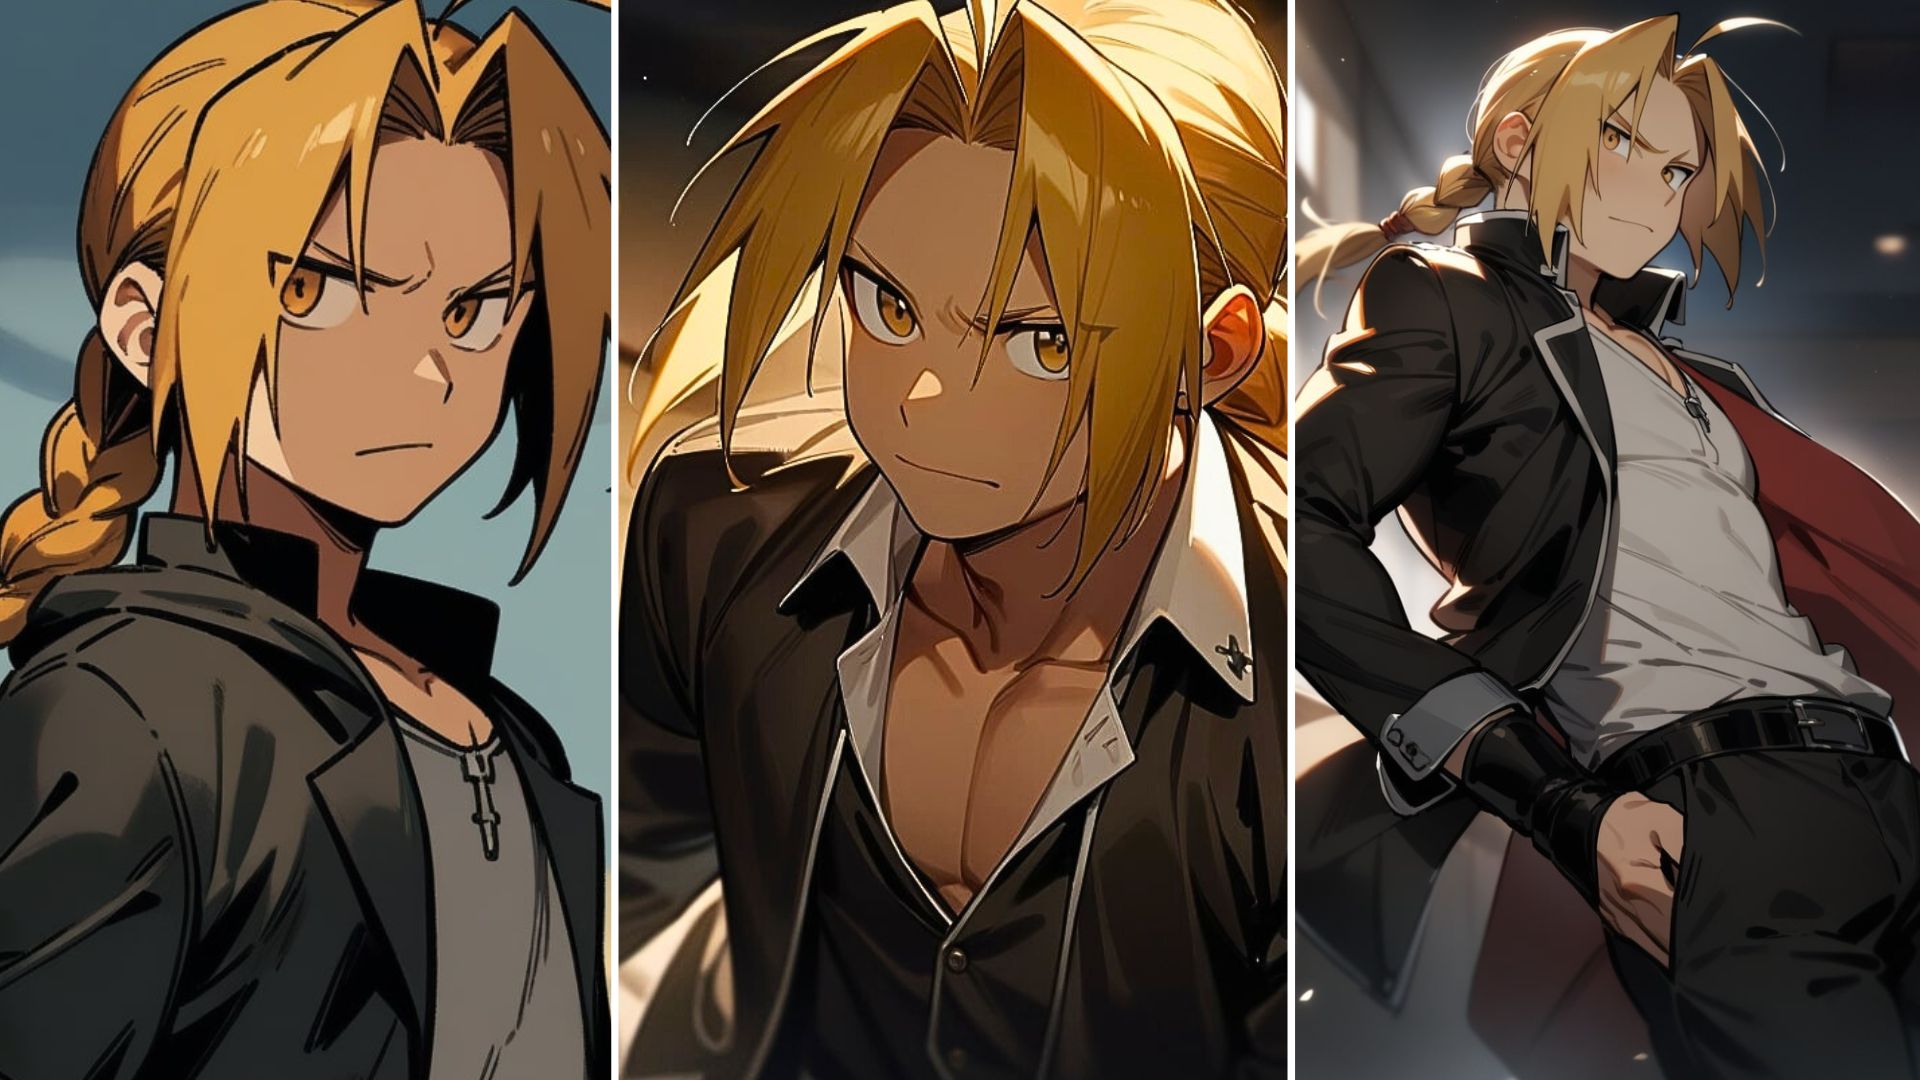 Hd Wallpapers Of Edward Elric